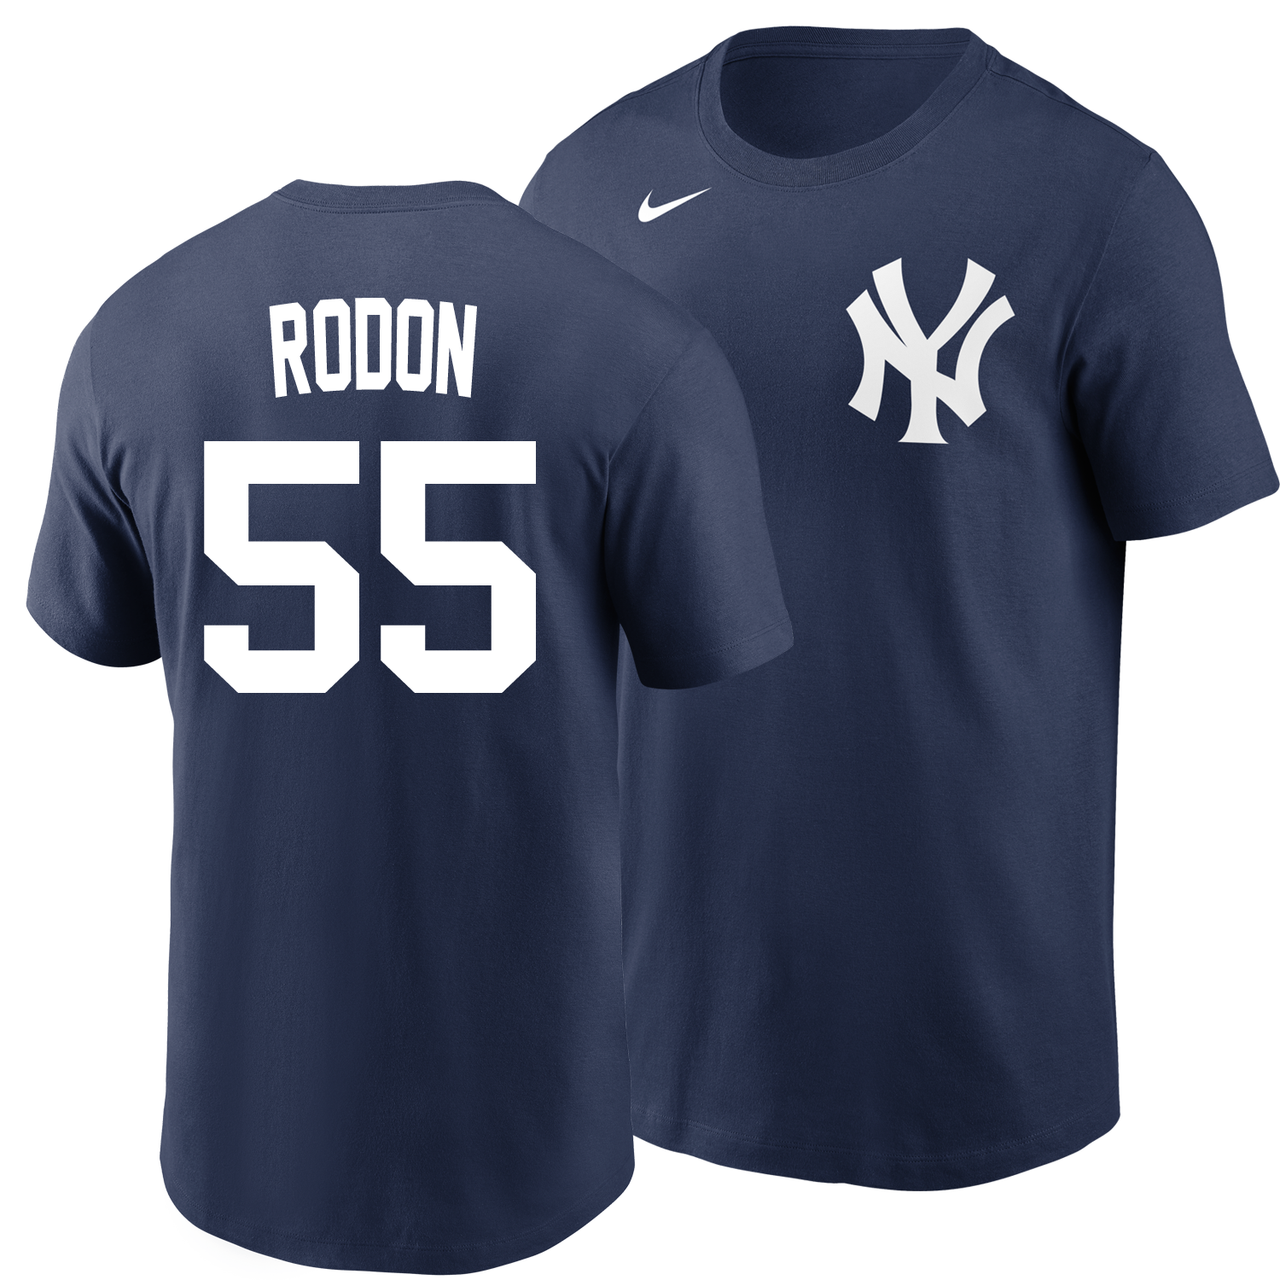 Women's Nike Carlos Rodon White/Navy New York Yankees Home Official Player Jersey, S